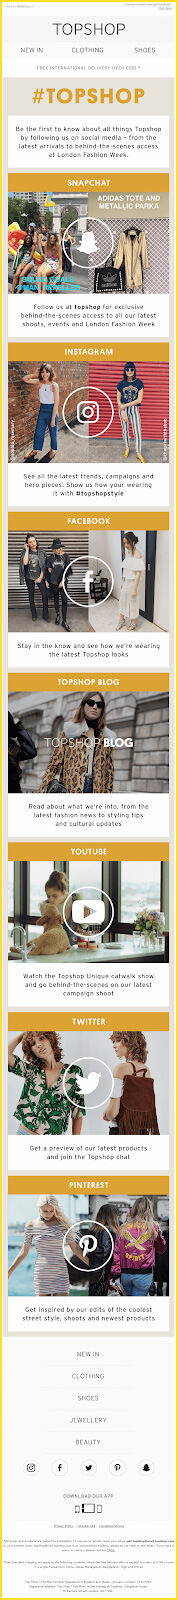 TopShop welcome email 3